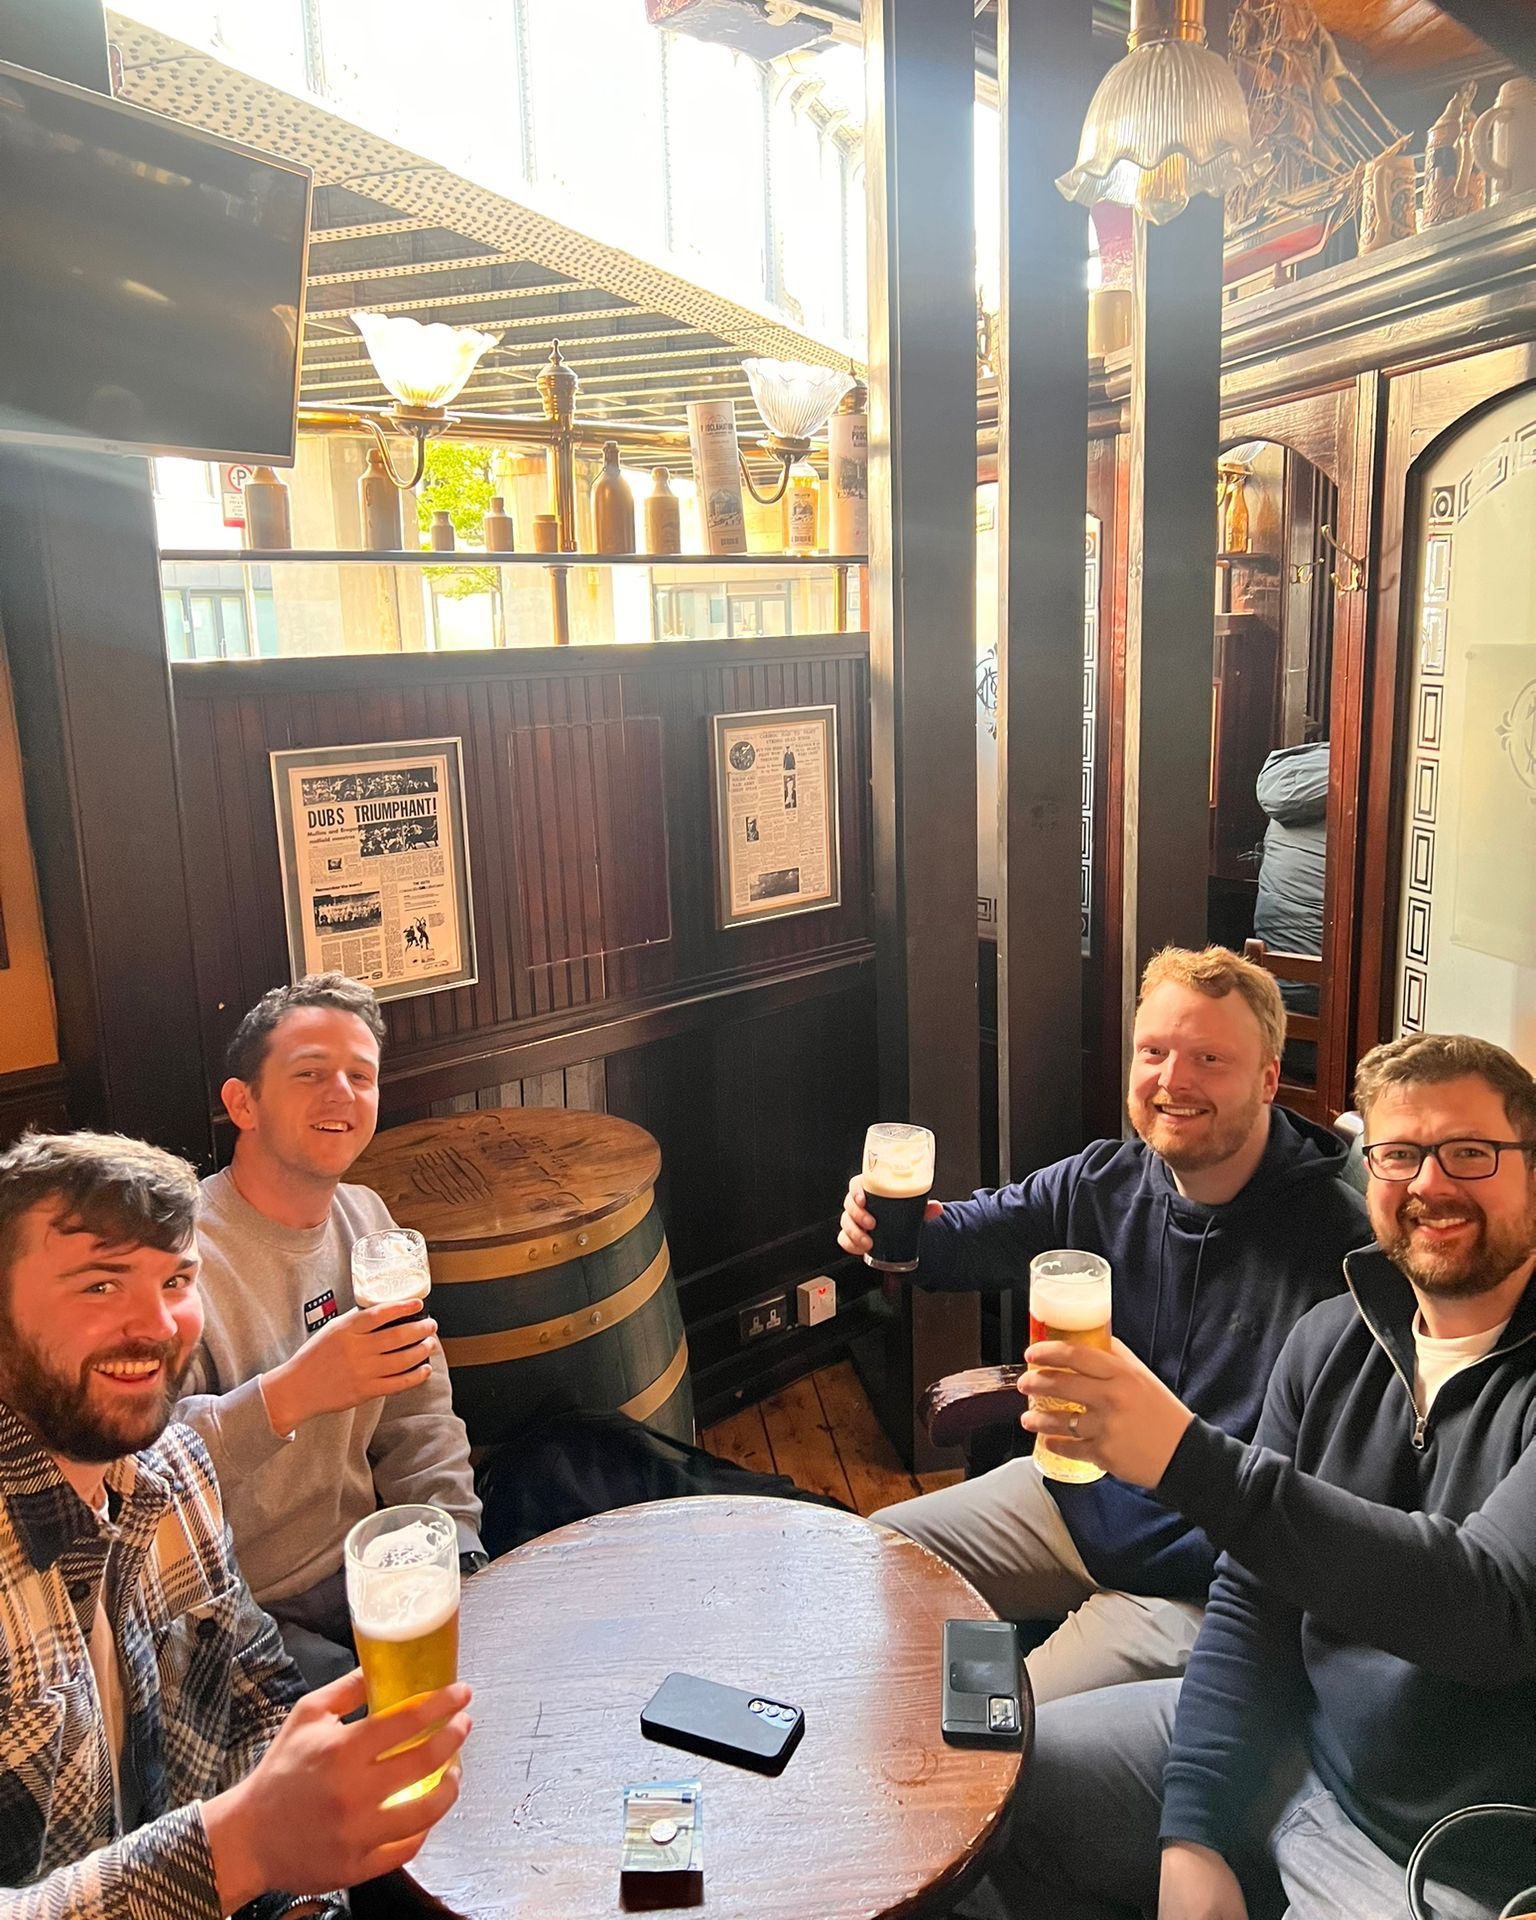 Grab your mates and cozy into the snug for a grand ole time! 🍻 Nothing beats laughter, good company, and a pint in the heart of Dublin. 

#PubLife #DublinSnug #MolloysDublin